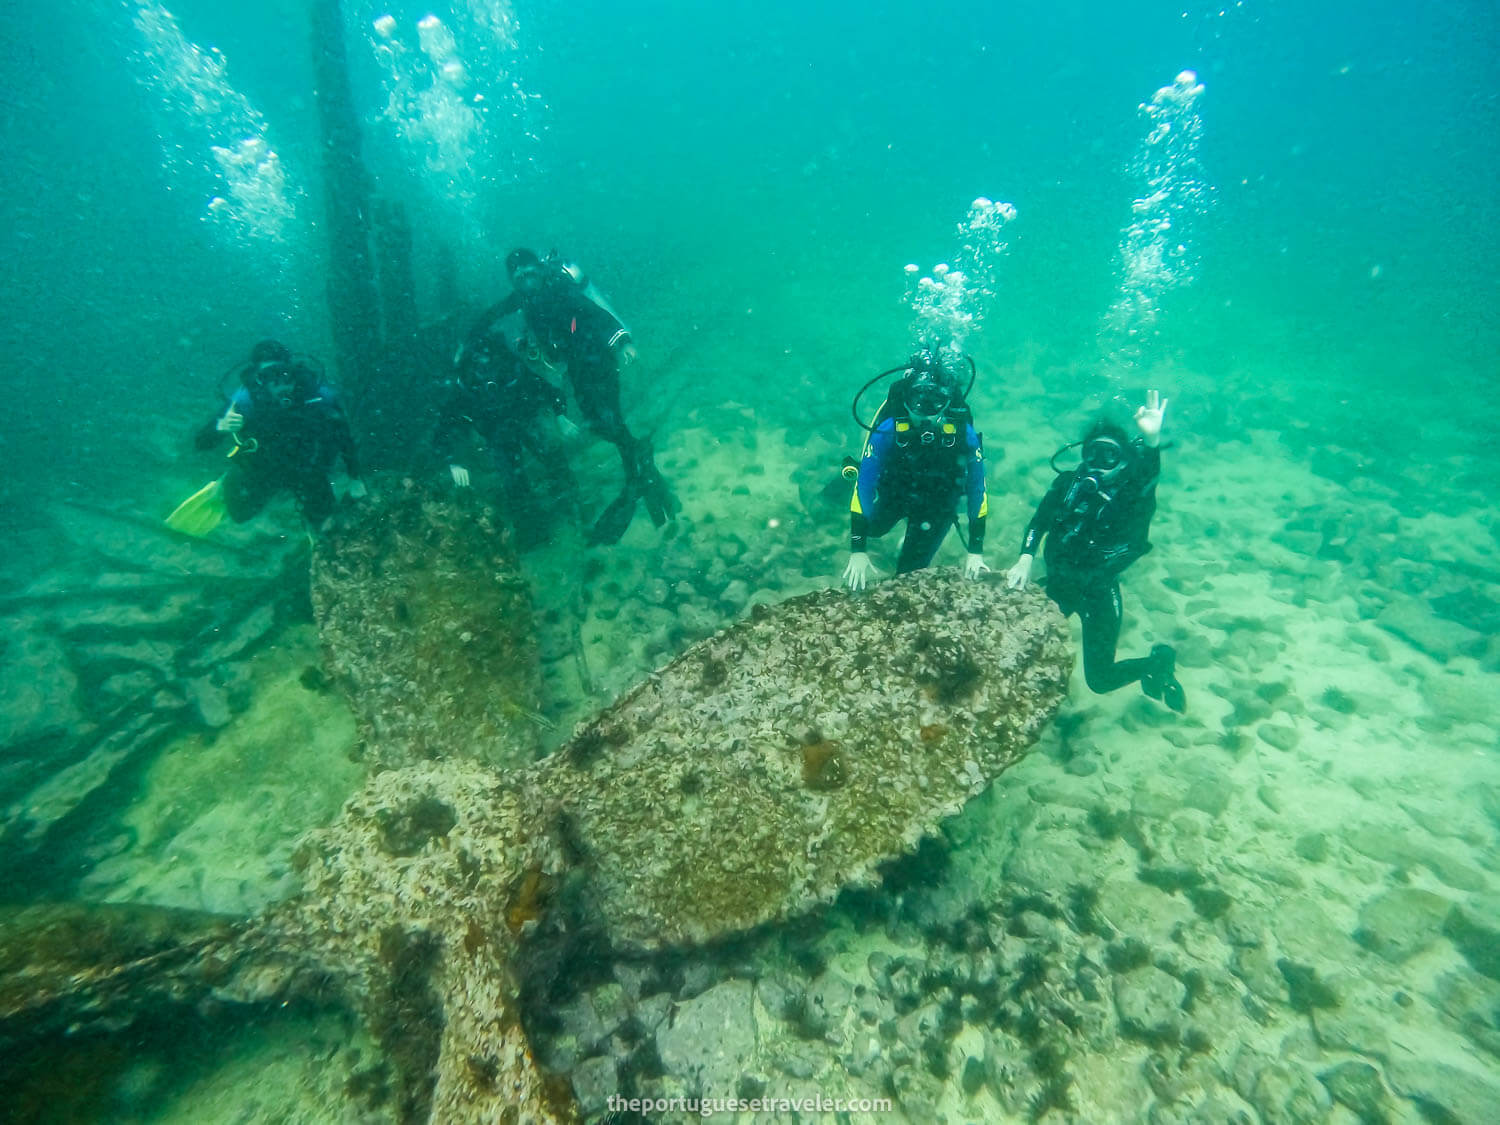 The propeller of the Carawa SS wreck in San Cristobal, Galapagos